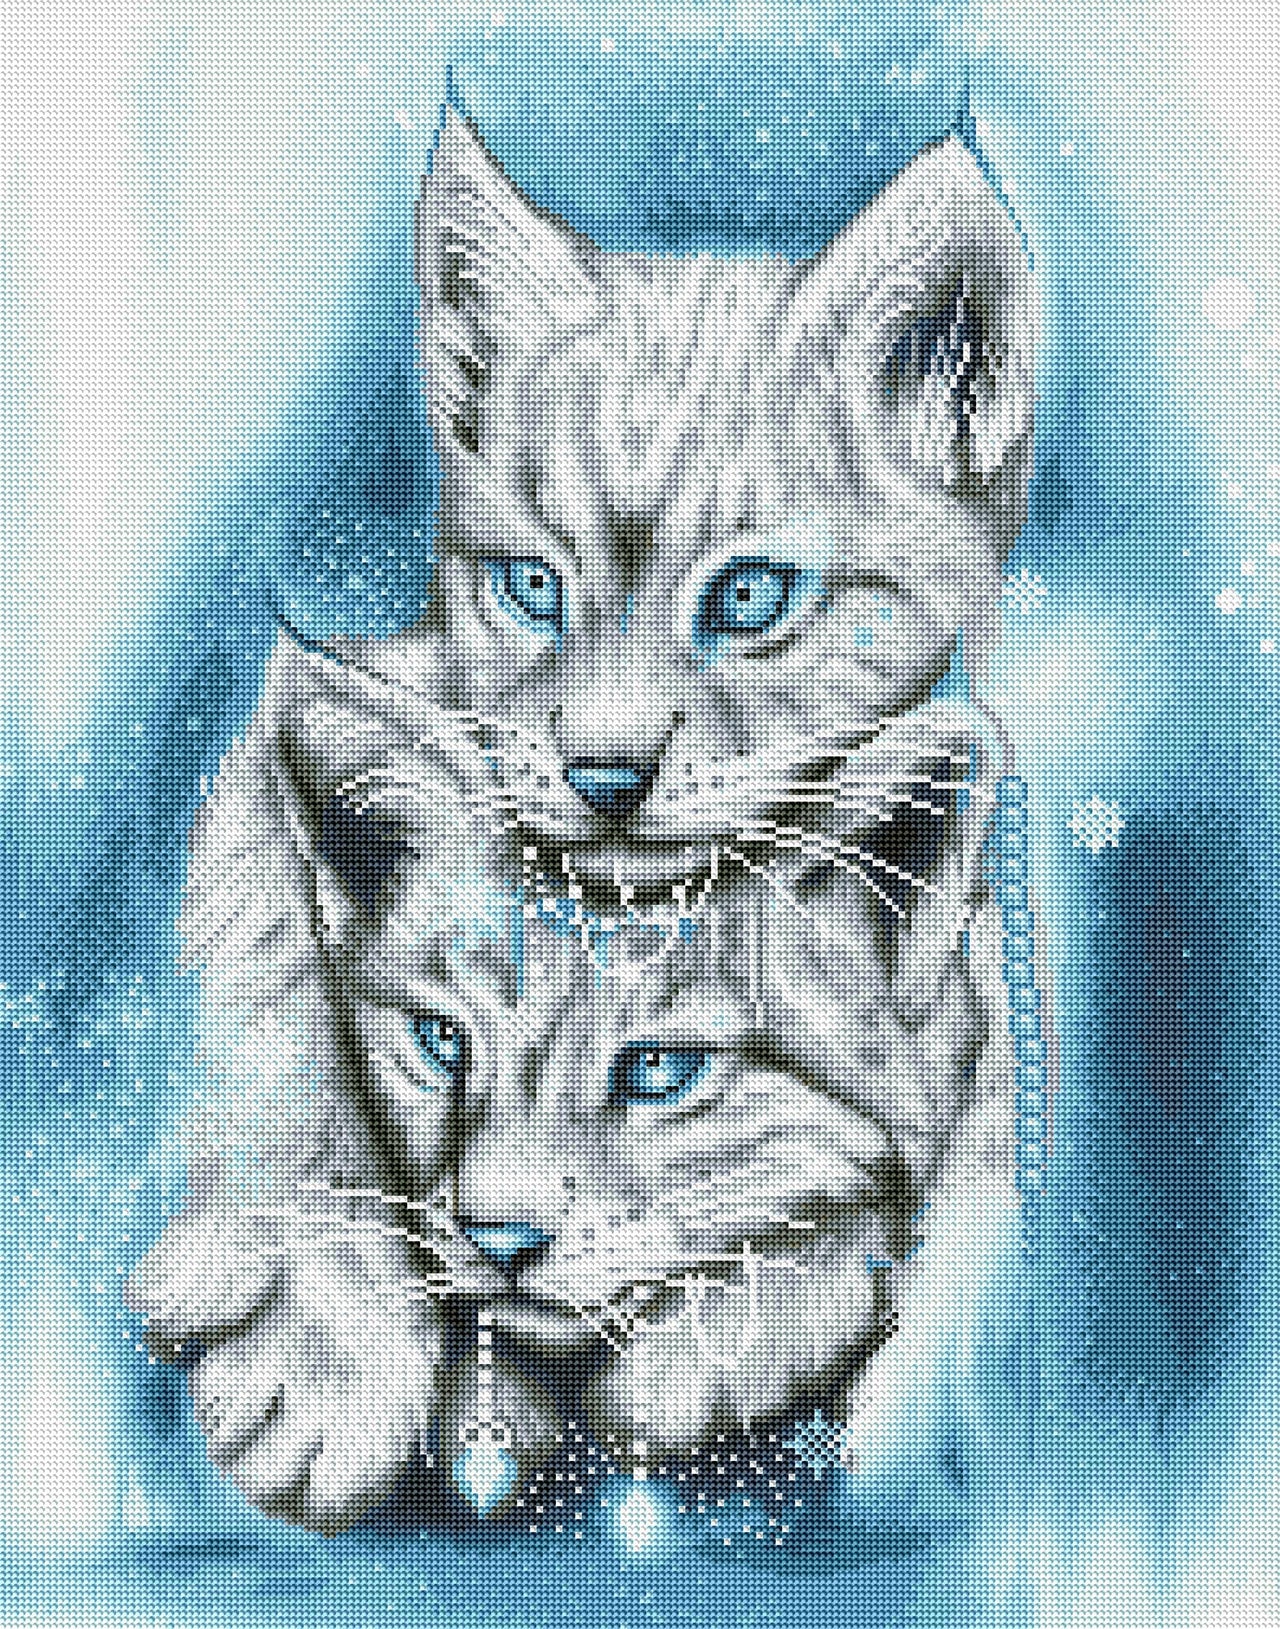 Diamond Painting Blue Winter Lynx 22" x 28″ (56cm x 71cm) / Round with 25 Colors including 1 AB / 49,896